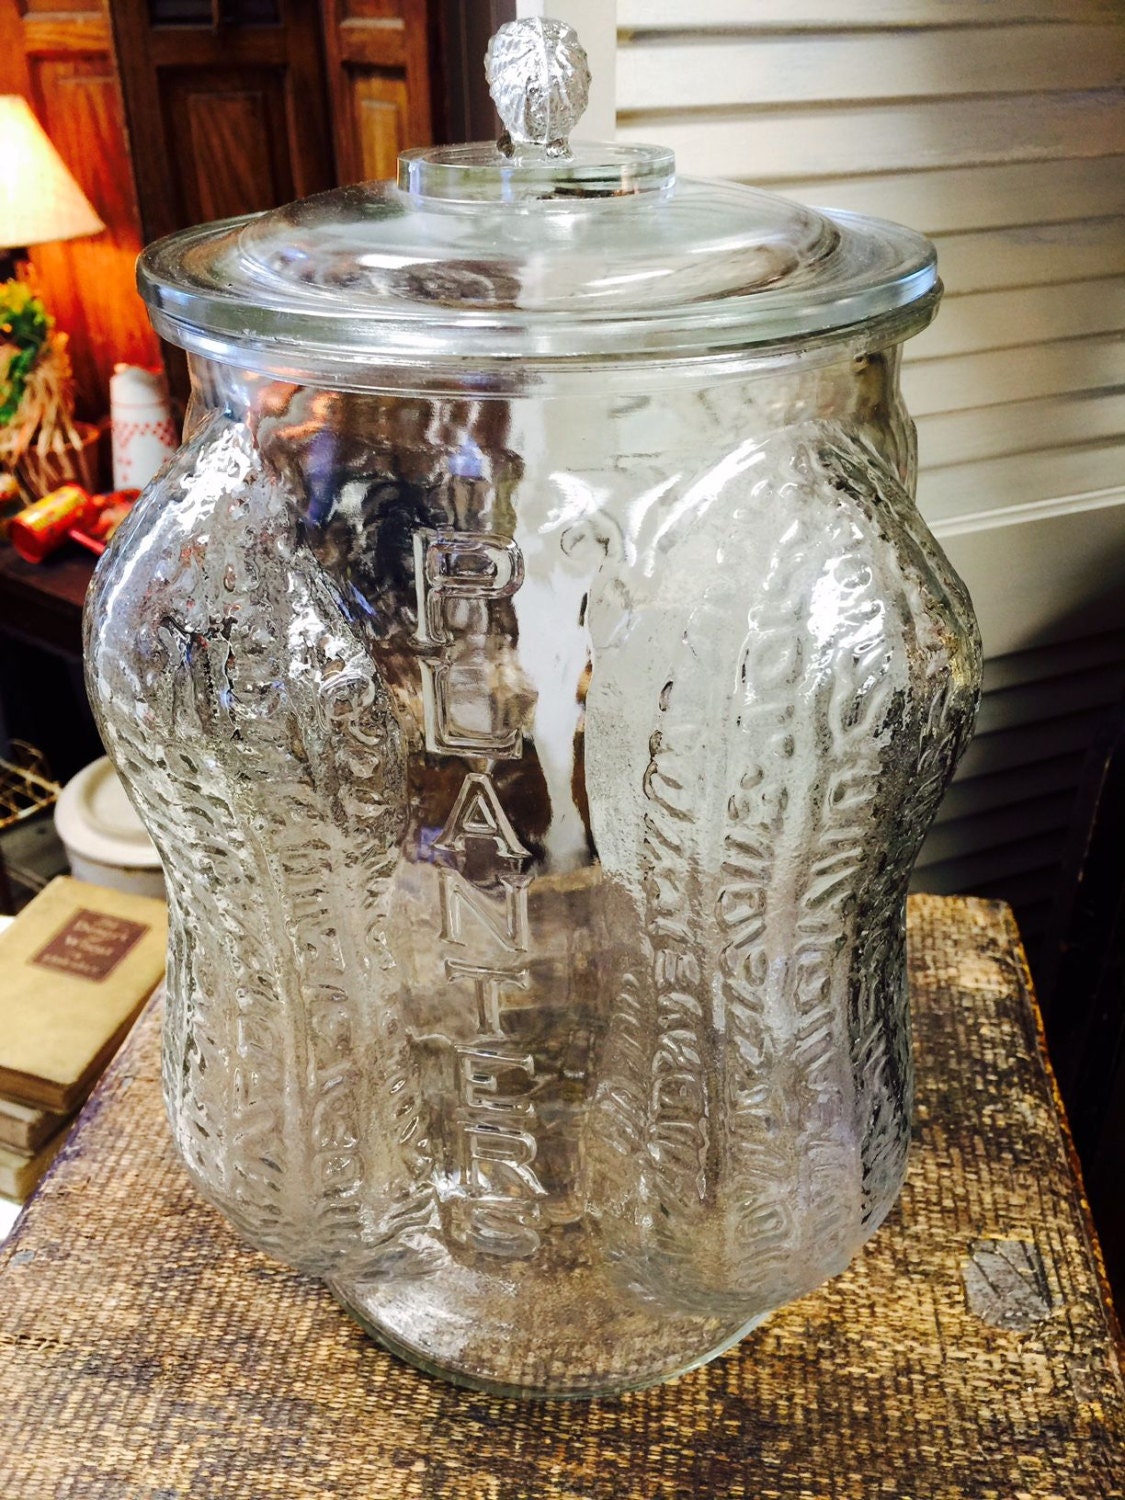 1930s 4-sided Planters Peanut Glass Jar Counter Display with1125 x 1500